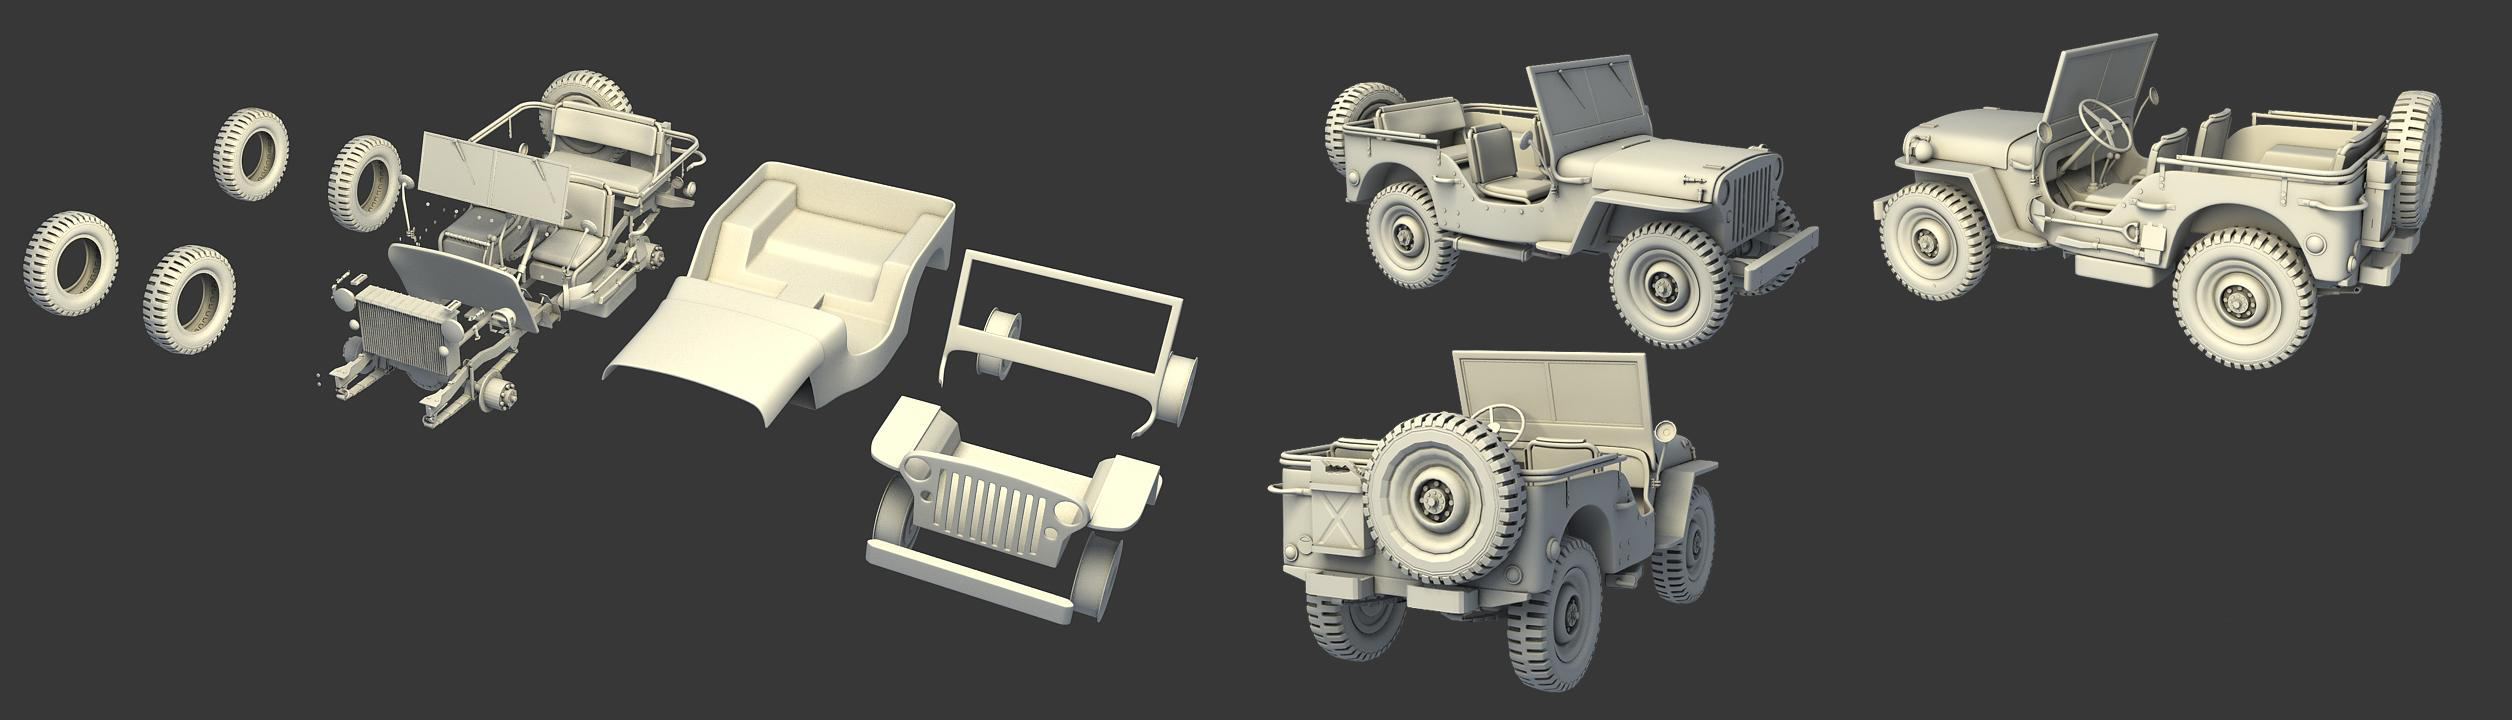 Willys Jeep Production Analysis, A Real Photo-Level Rendering Tutorial 